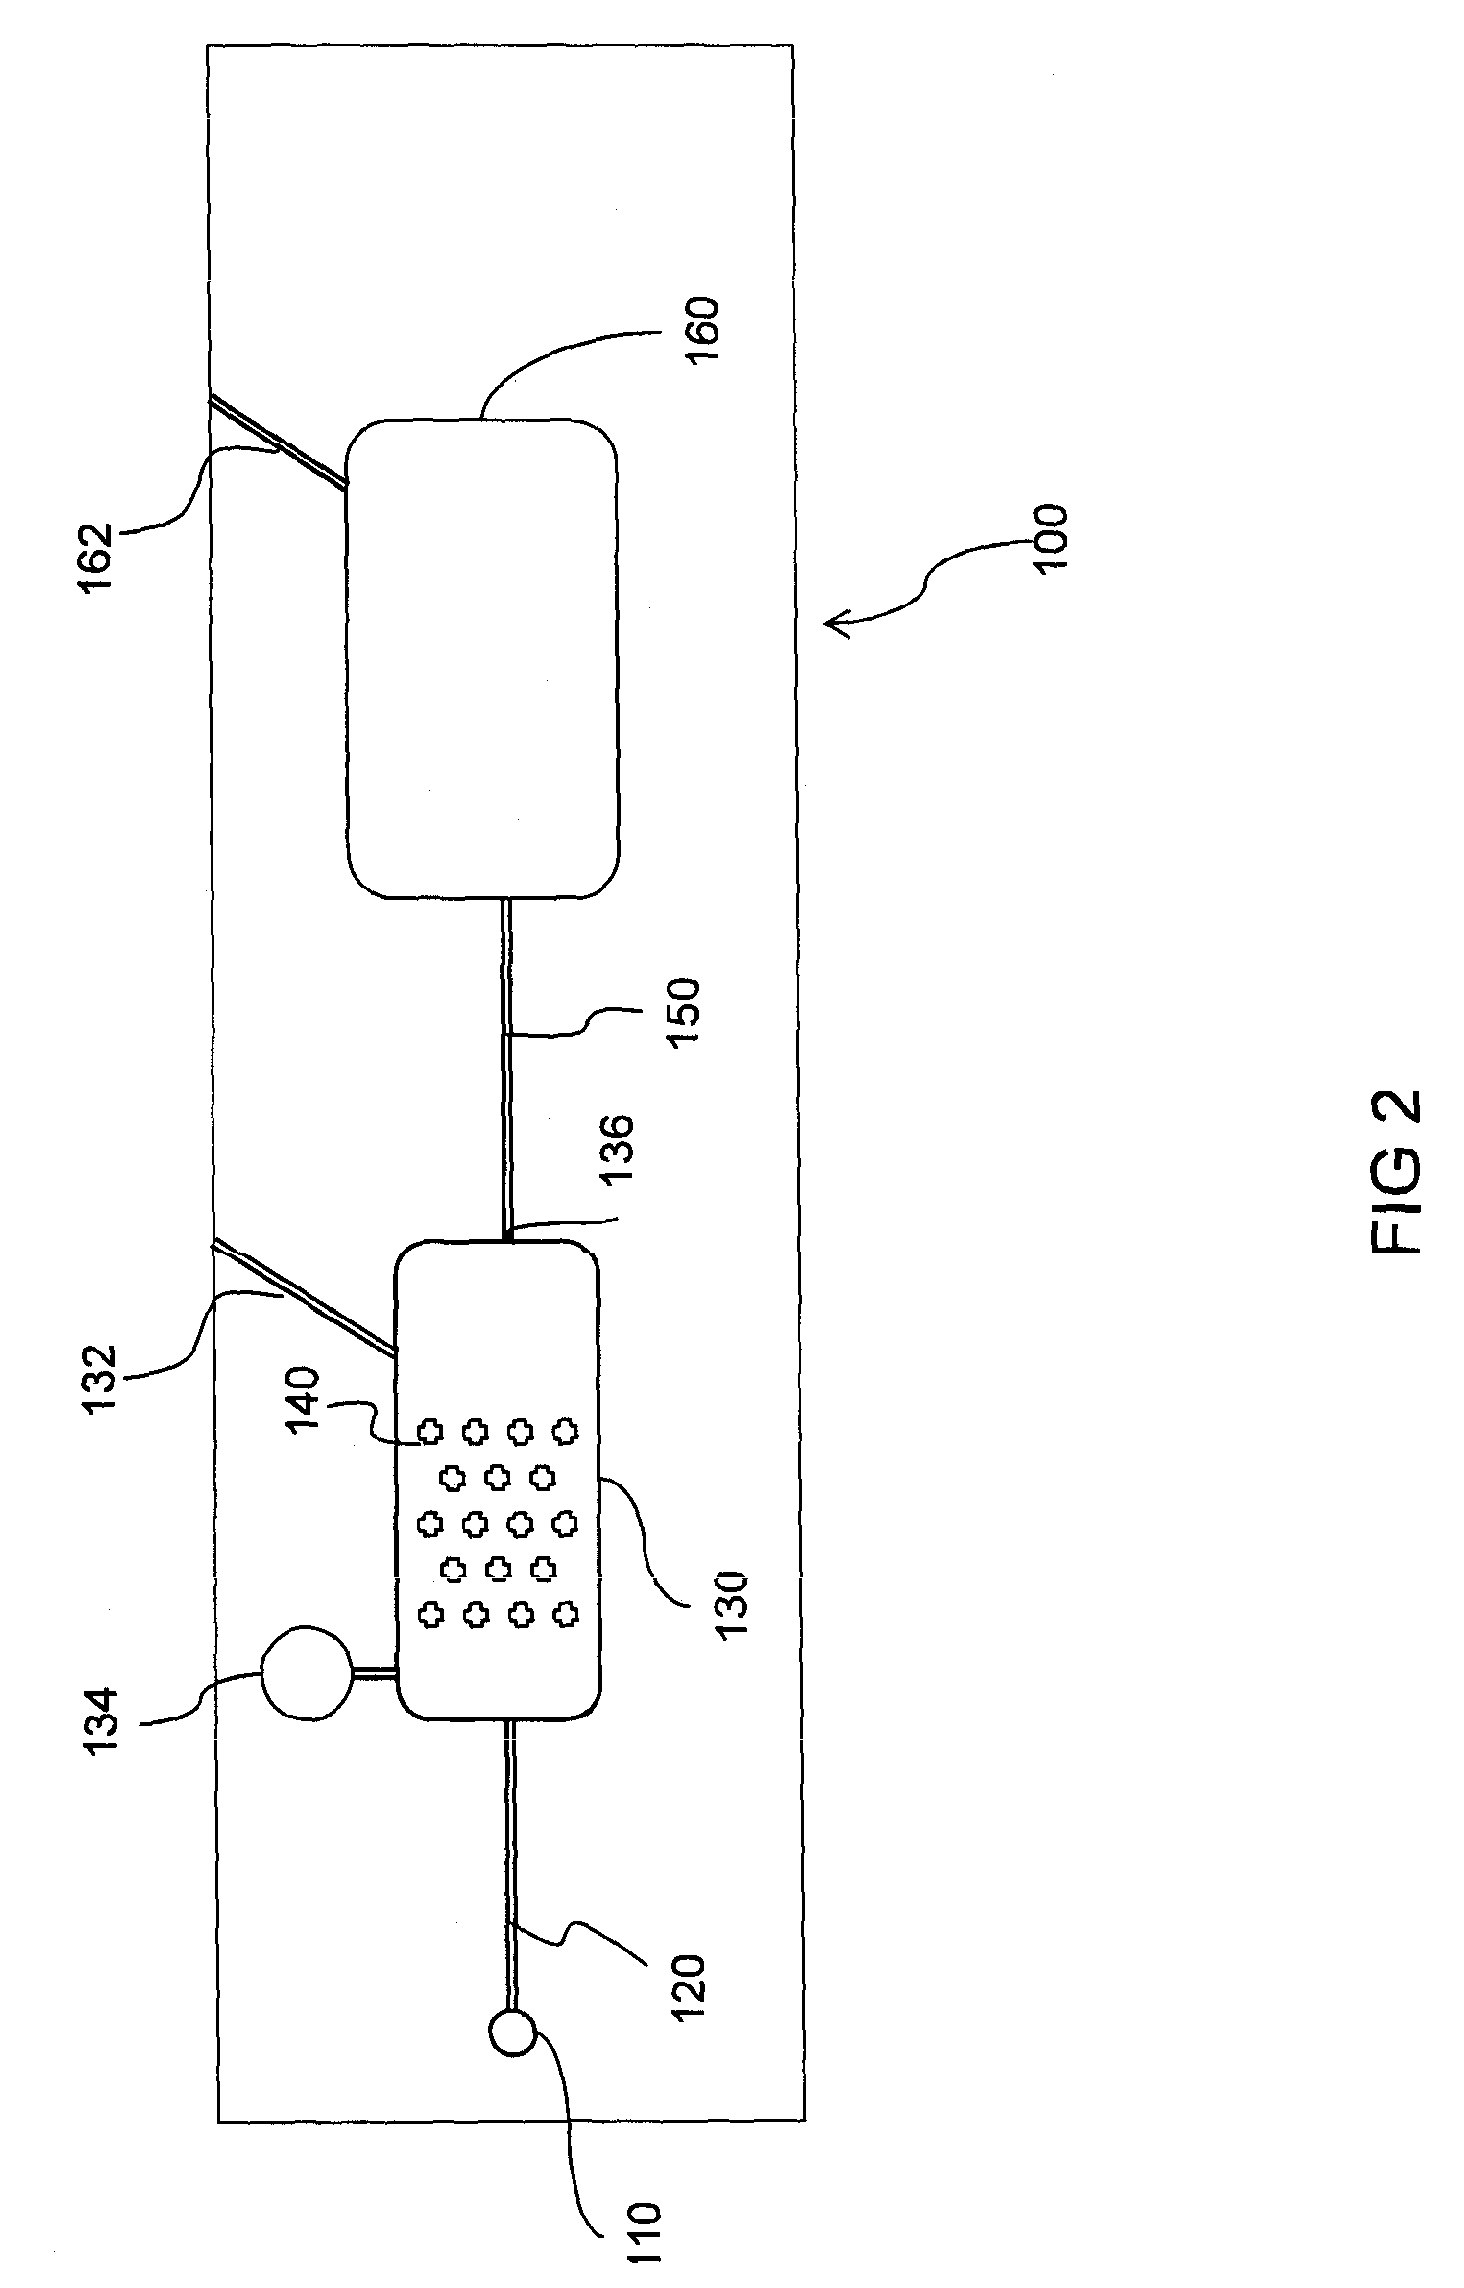 Method and apparatus for entry of specimens into a microfluidic device